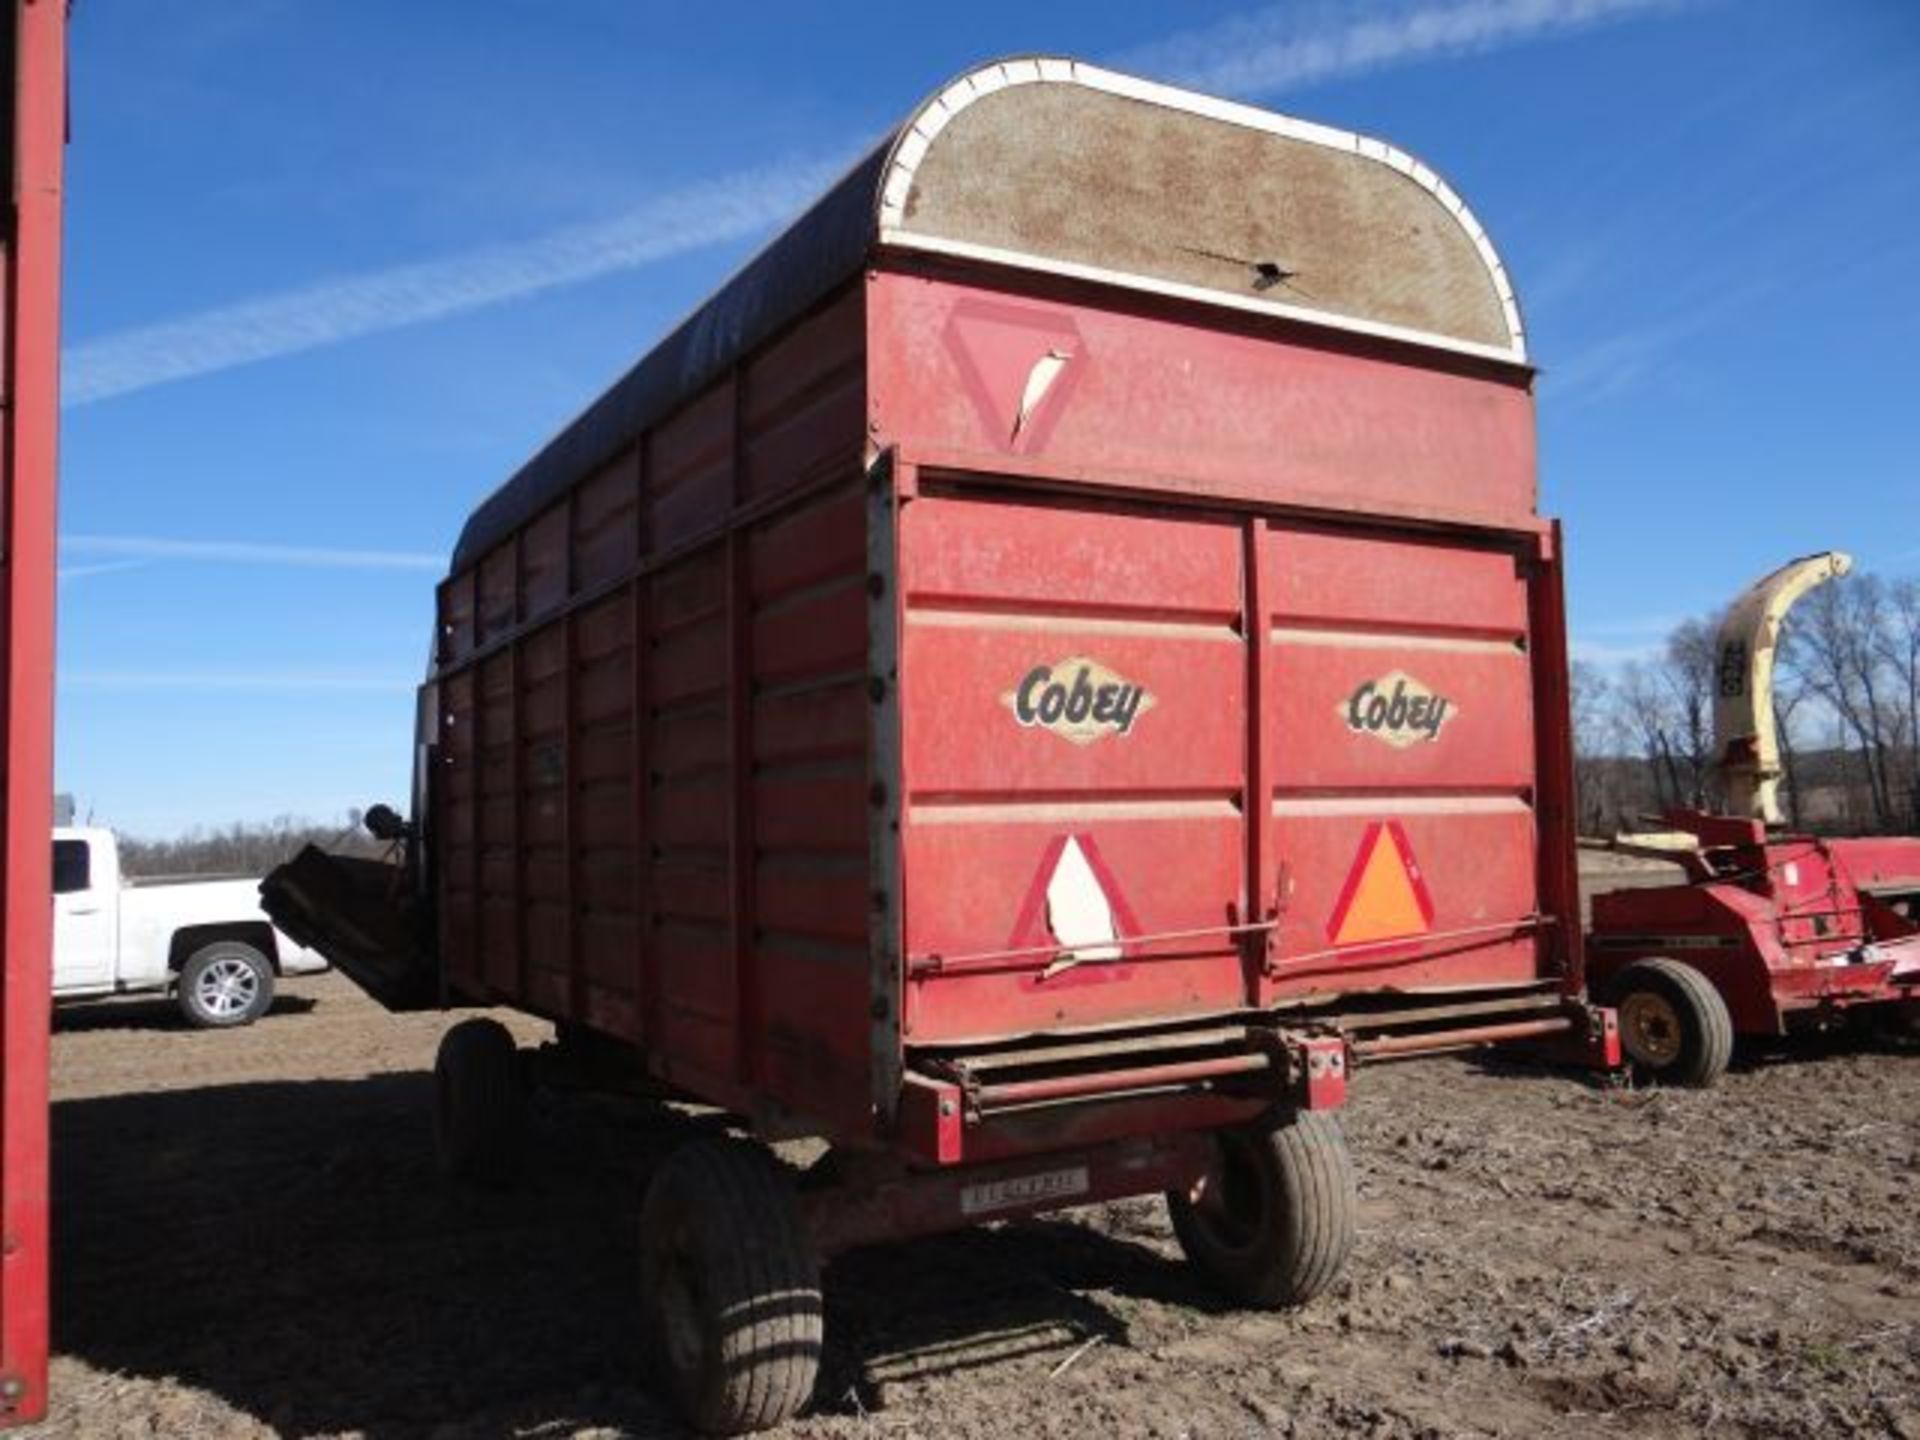 Cobey Covered Silage Wagon - Image 3 of 4